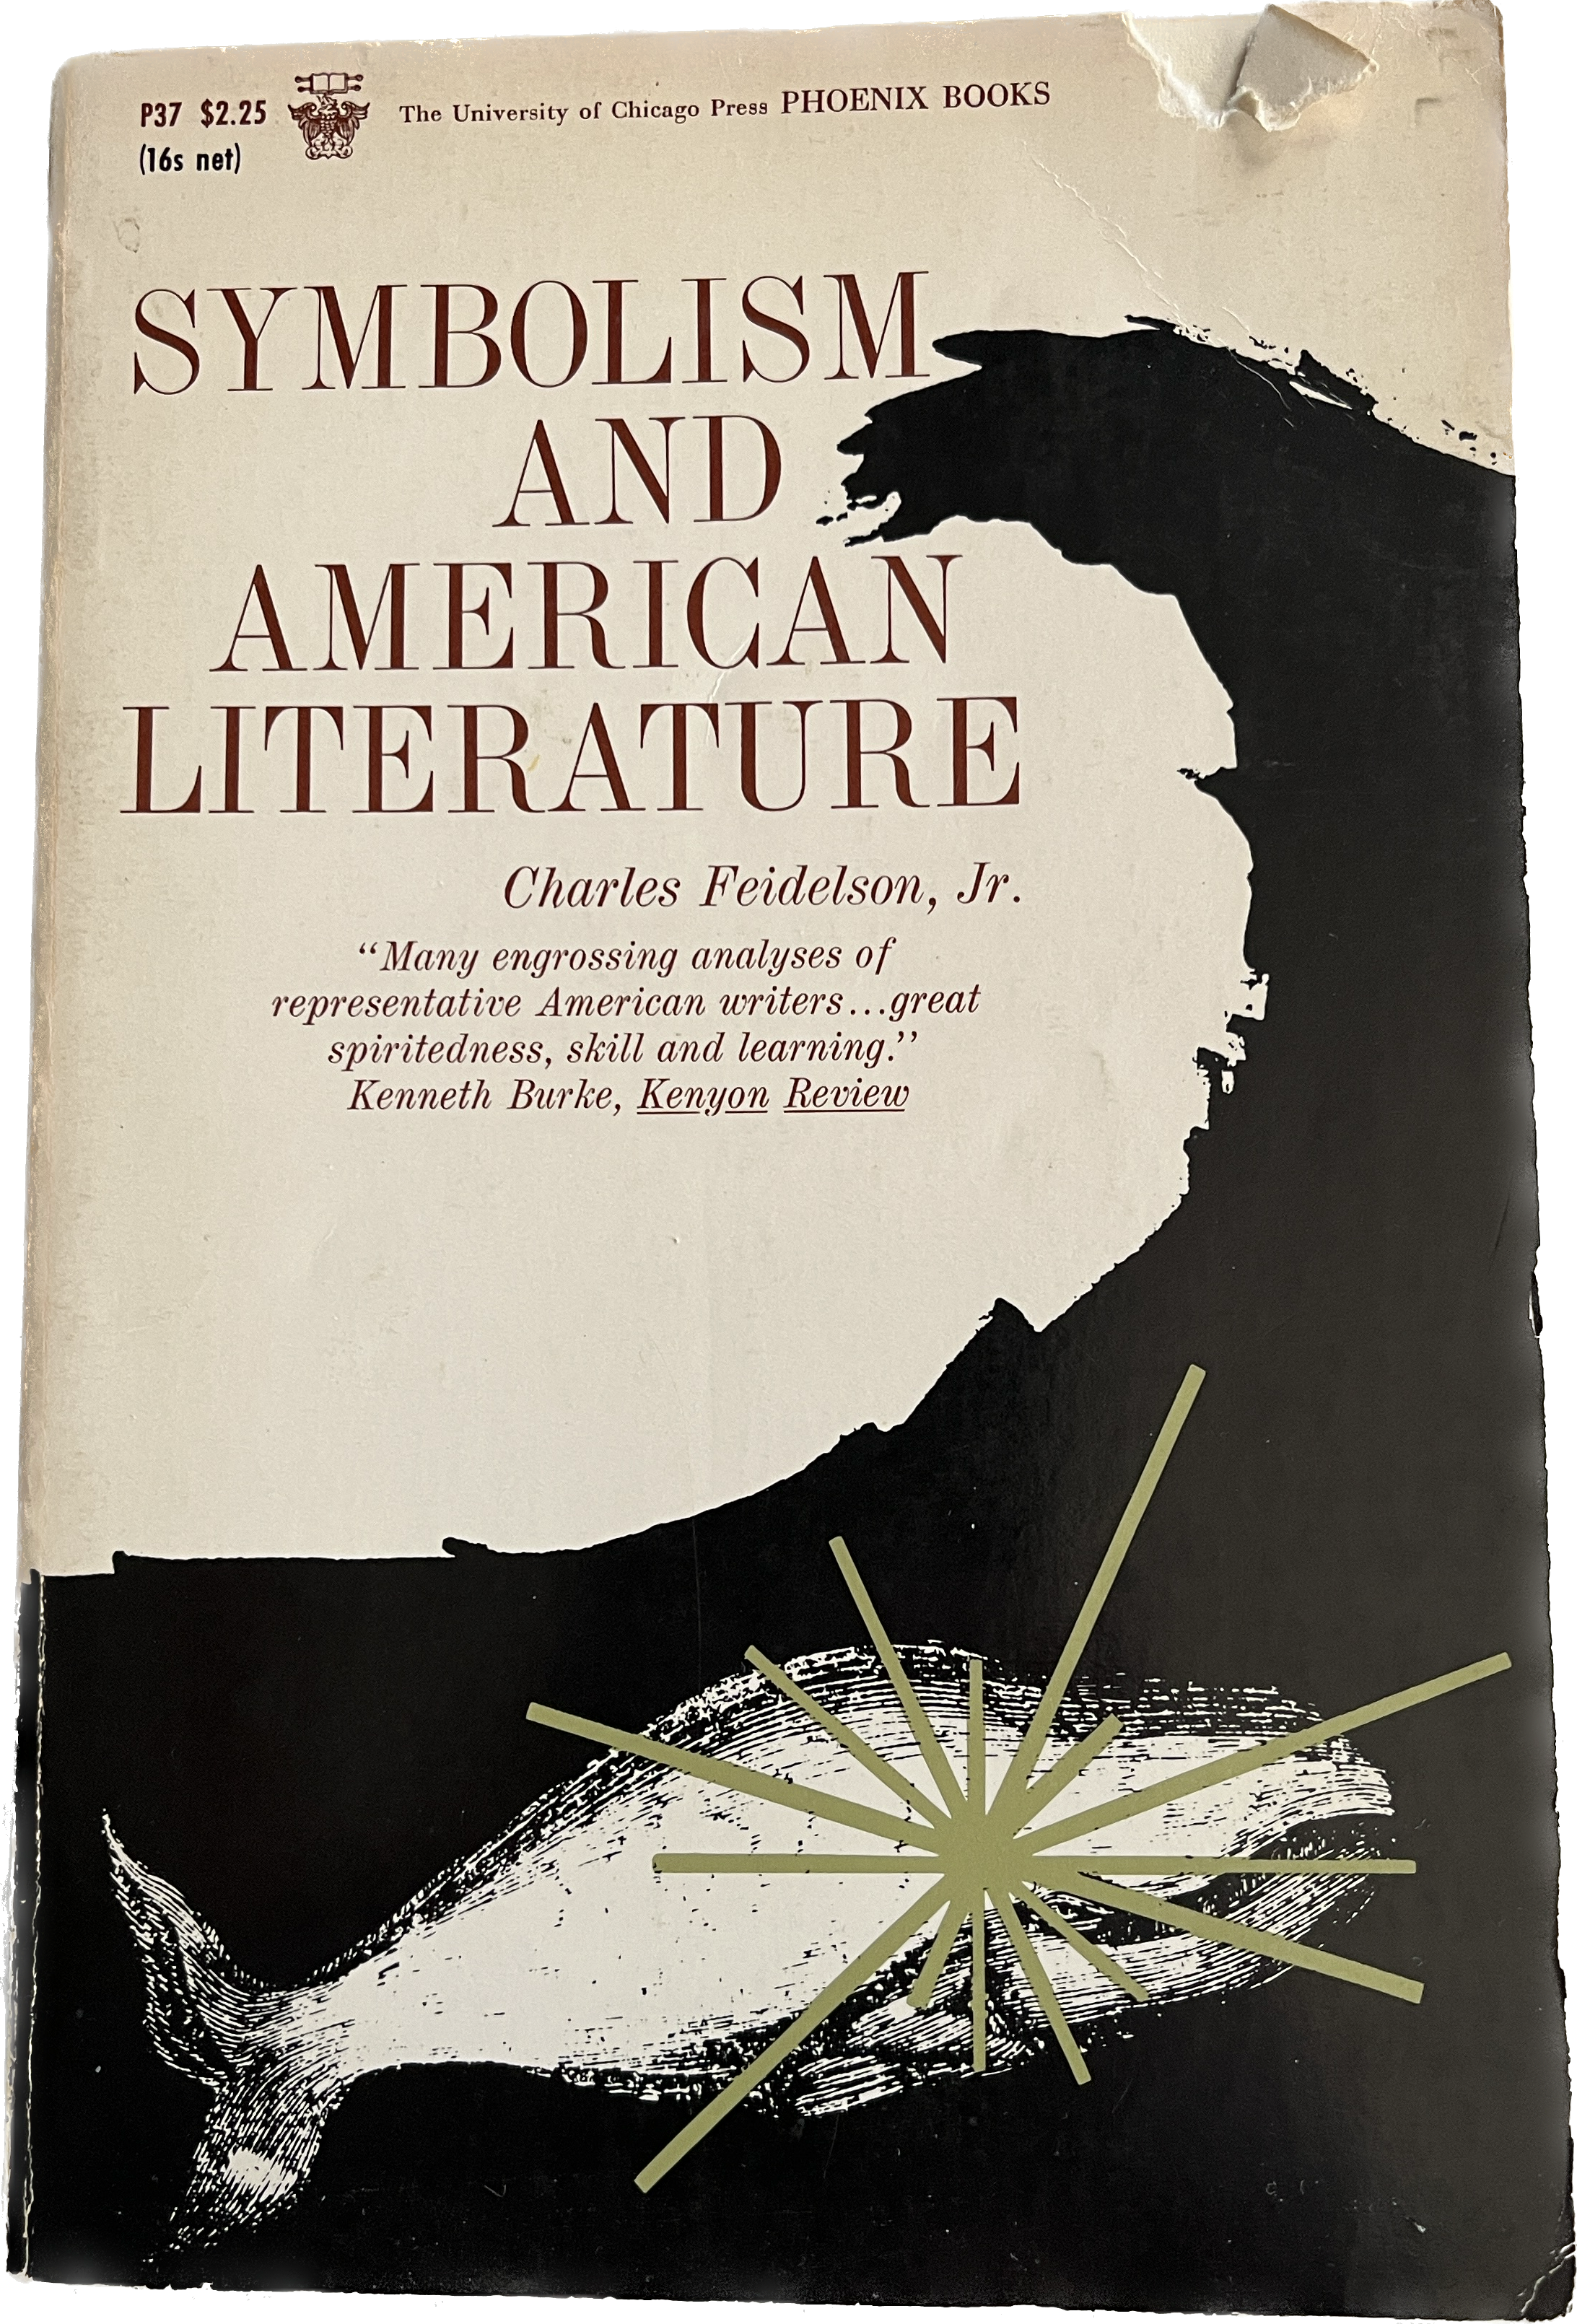 symbolism and american literature by charles feidelson, jr.